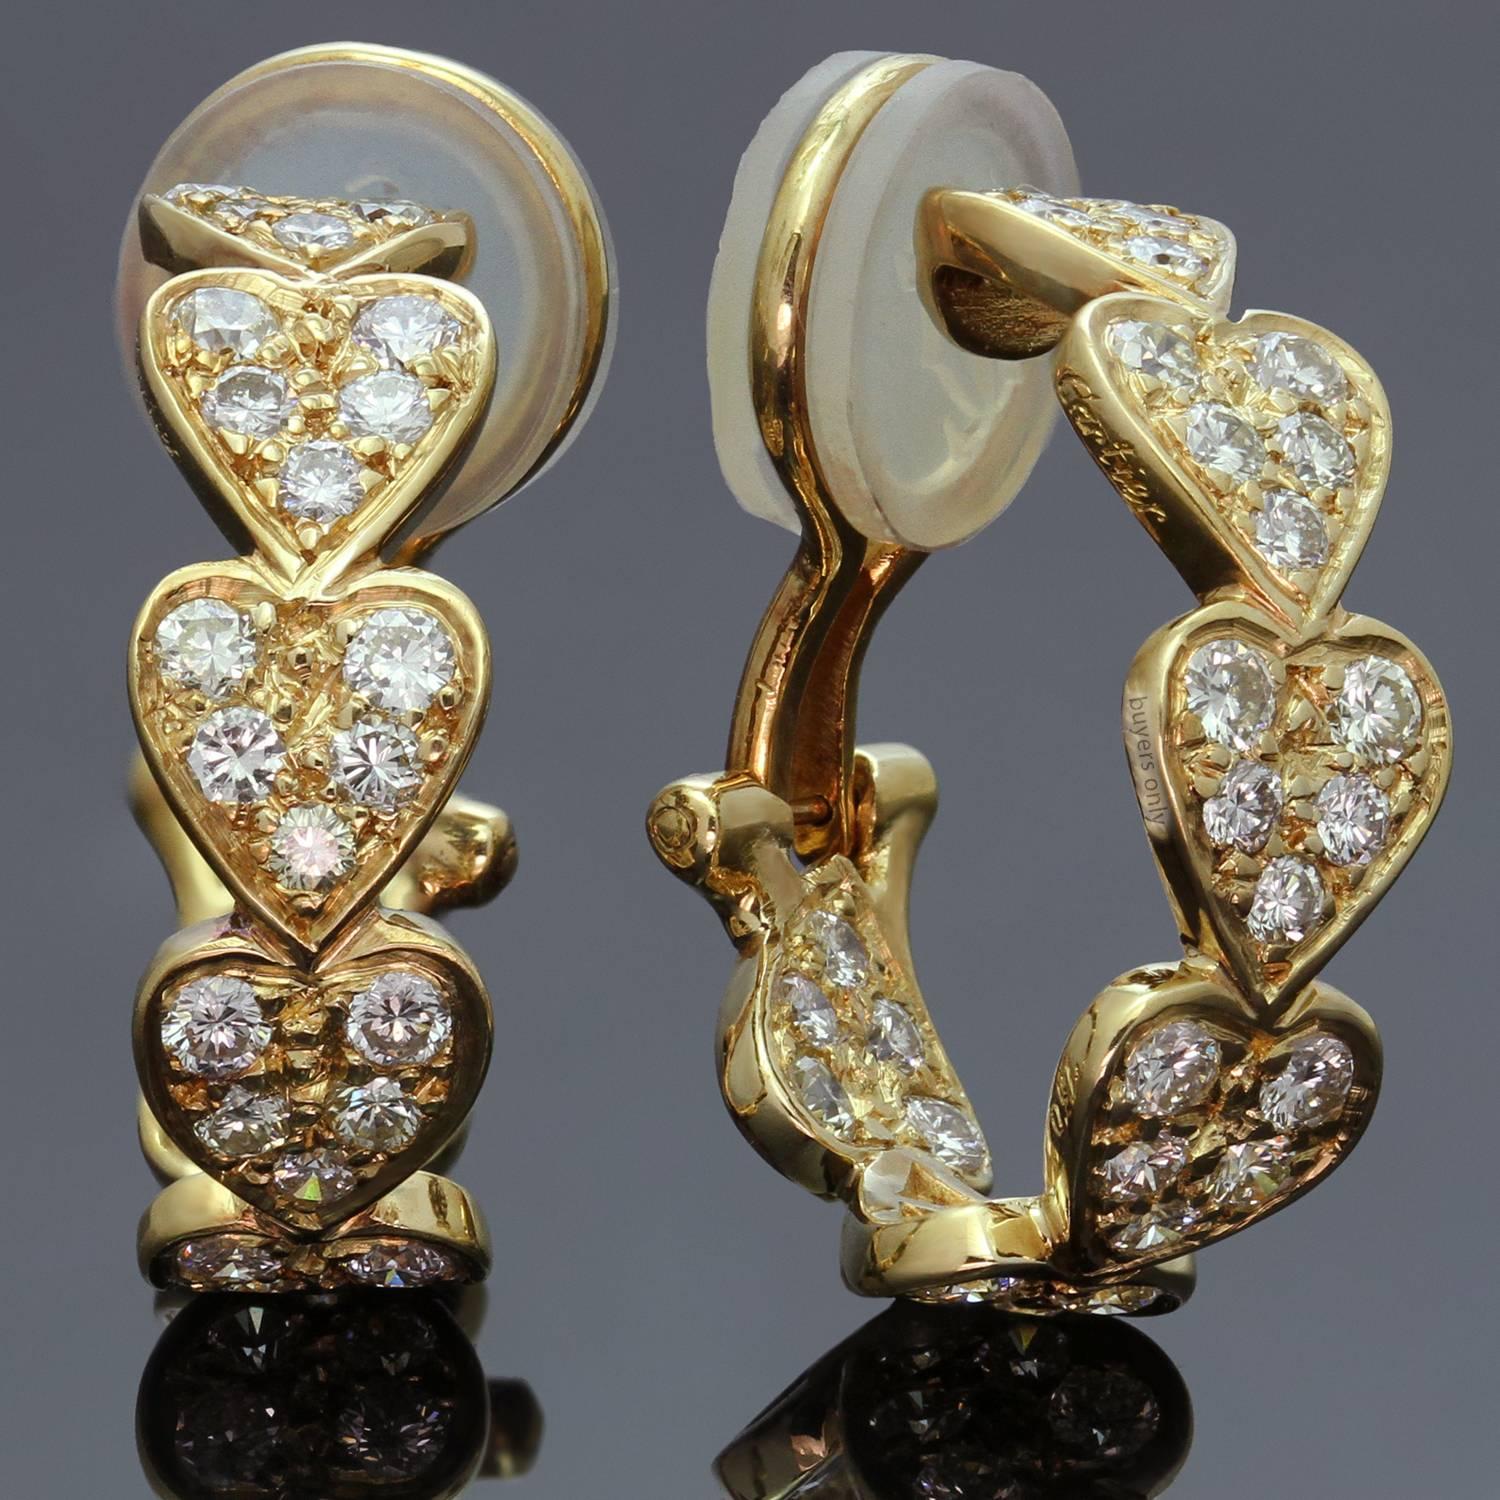 These fabulous Cartier earrings from the romantic Virgo collection feature heart-shaped half-hoop clip-on design crafted in 18k yellow gold and set with brilliant-cut round diamonds of an estimated 1.10 carats. Made in France circa 2000s. 